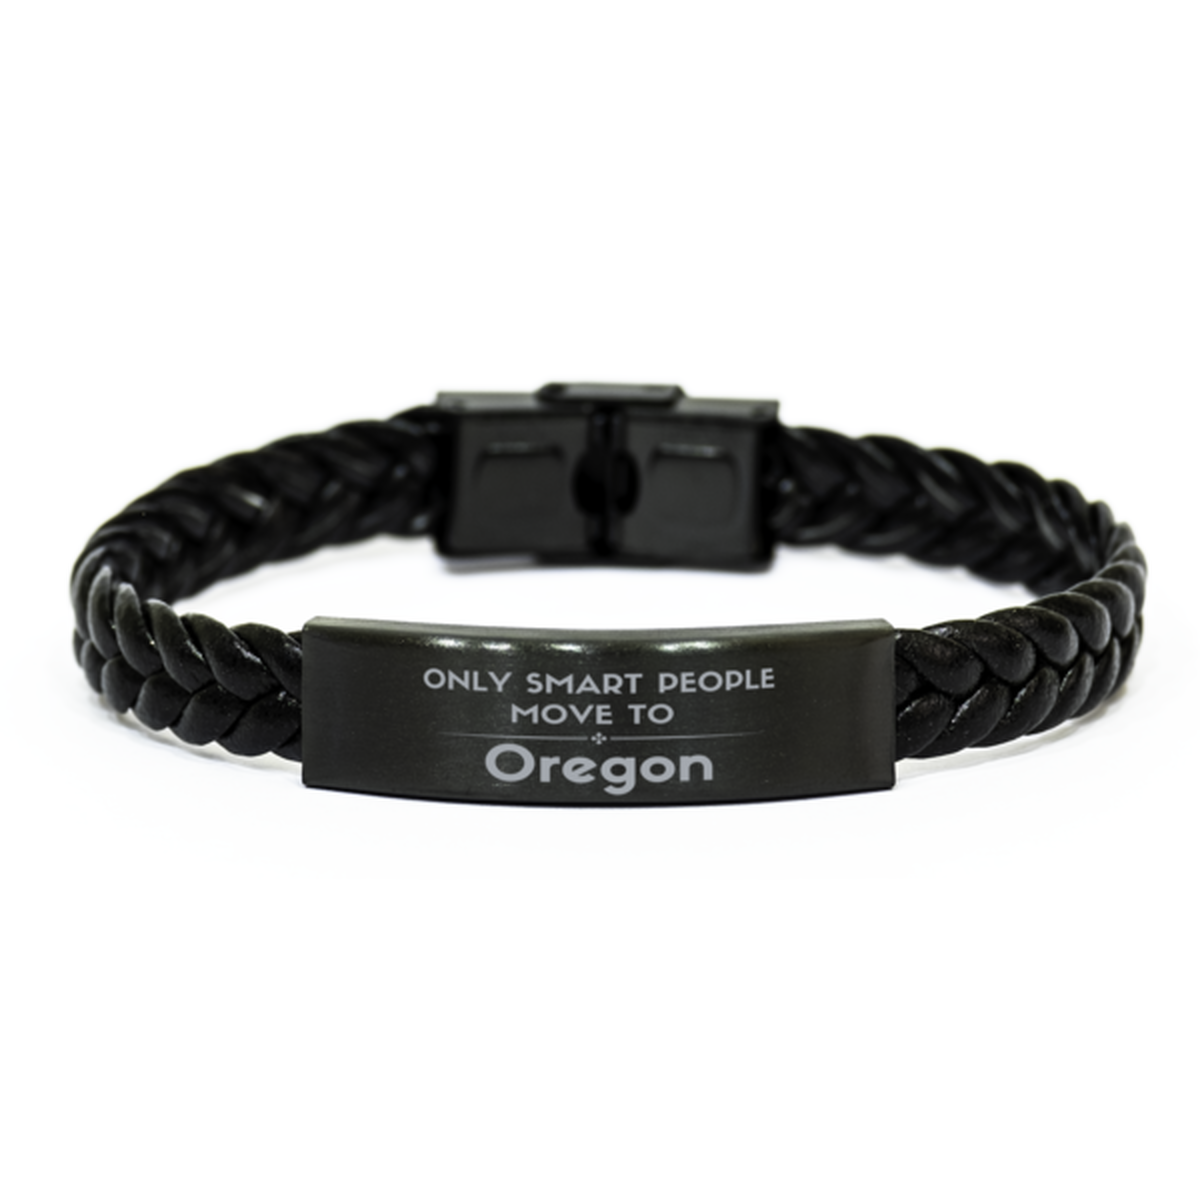 Only smart people move to Oregon Braided Leather Bracelet, Gag Gifts For Oregon, Move to Oregon Gifts for Friends Coworker Funny Saying Quote